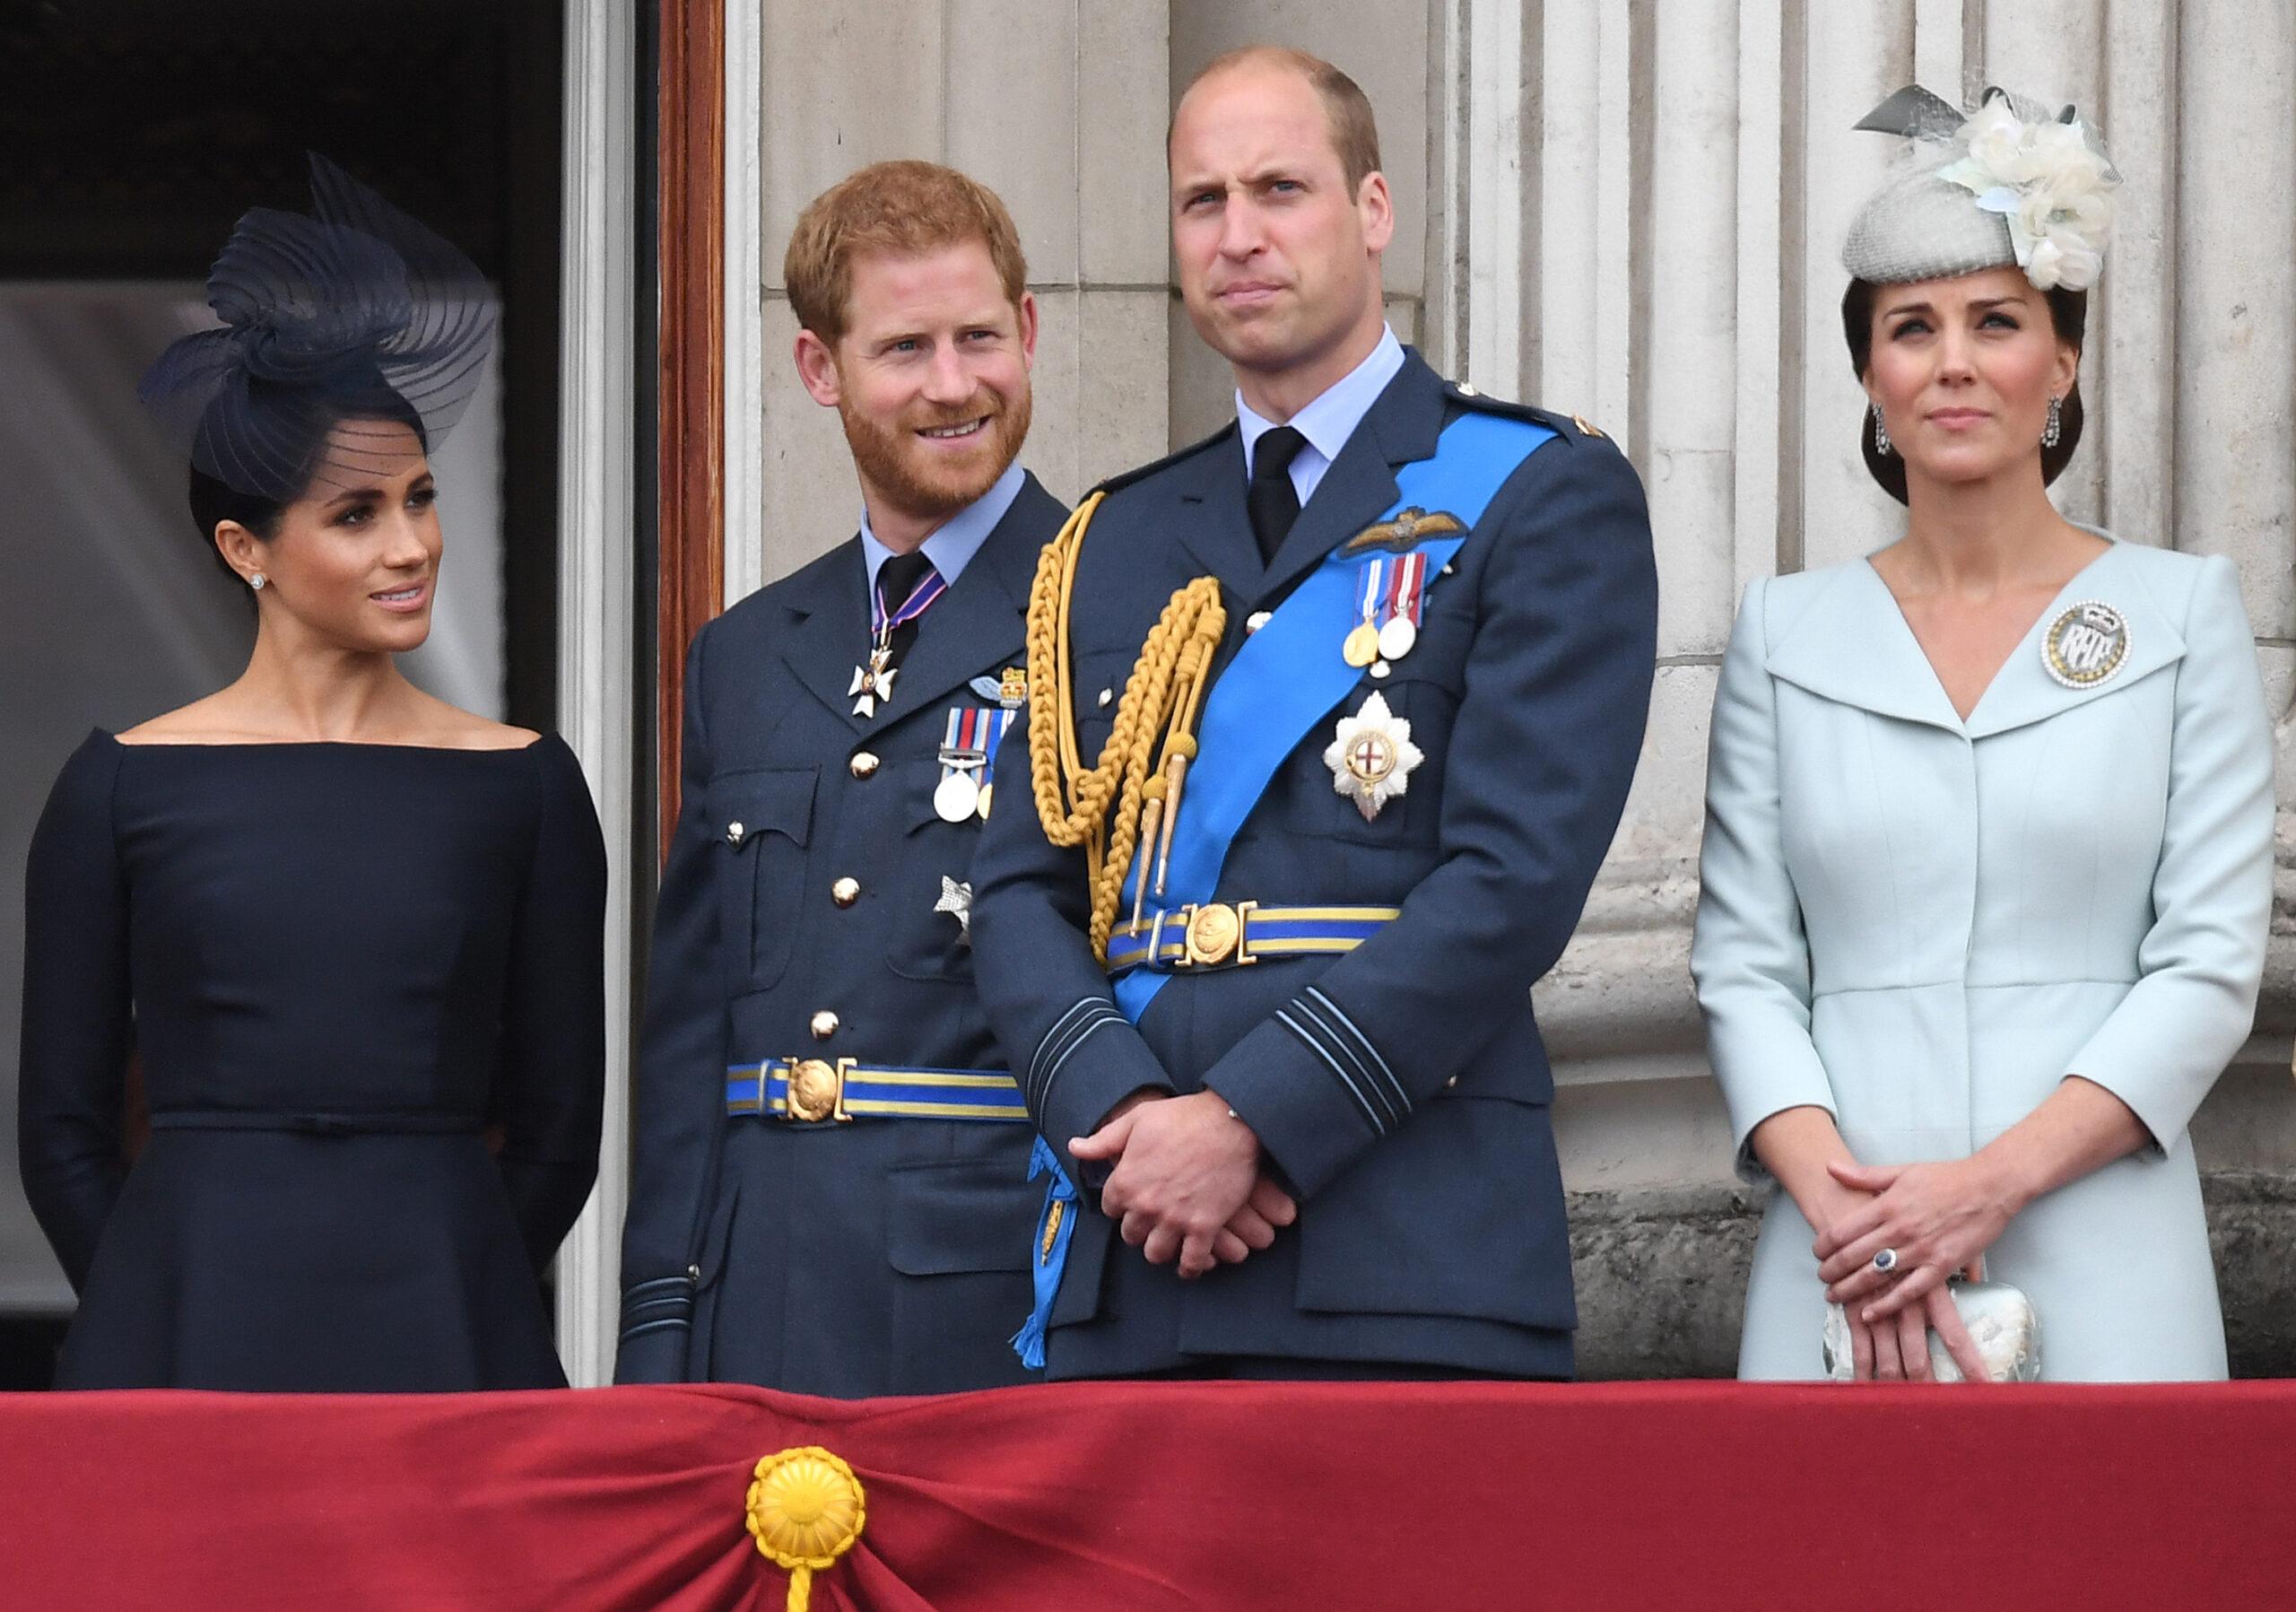 Meghan Markle, Duchess of Sussex, Prince Harry, Duke of Sussex, and The Duke and Duchess of Cambridge attend the RAF100 flypast at Buckingham Palace, London, UK, on the 10th July 2018. 10 Jul 2018